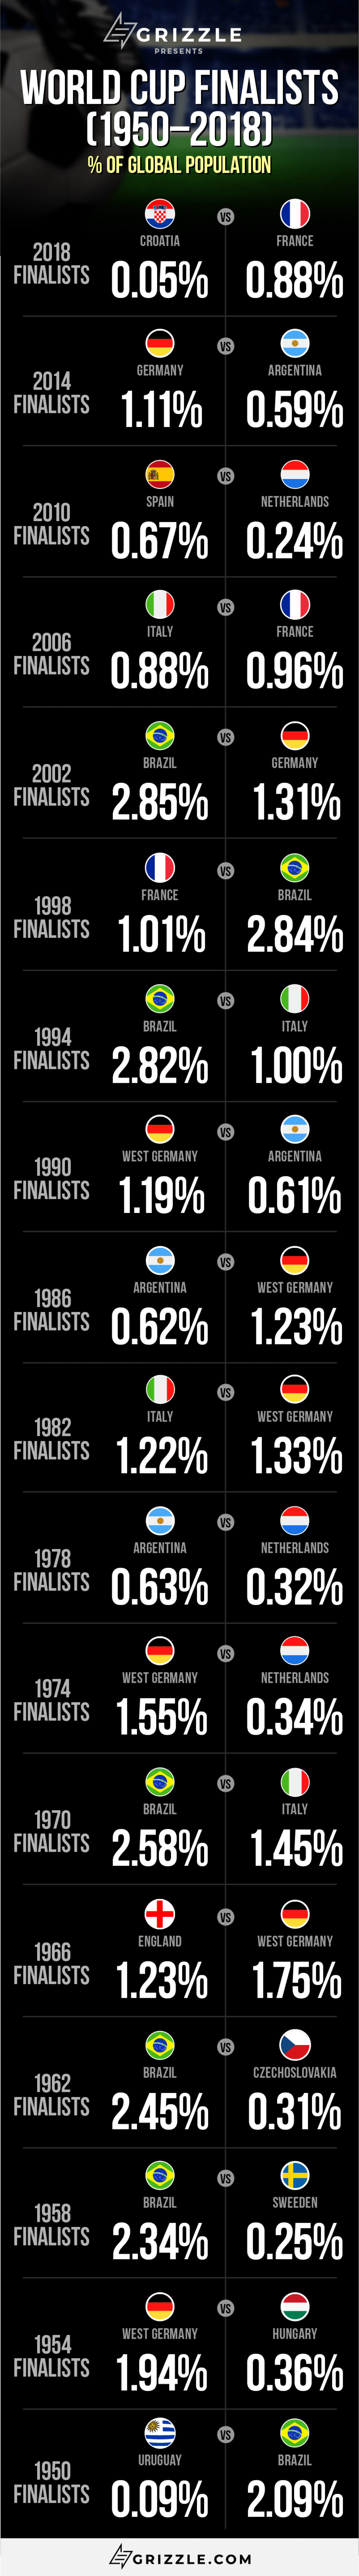 World Cup Finalists as % of Population Infographic